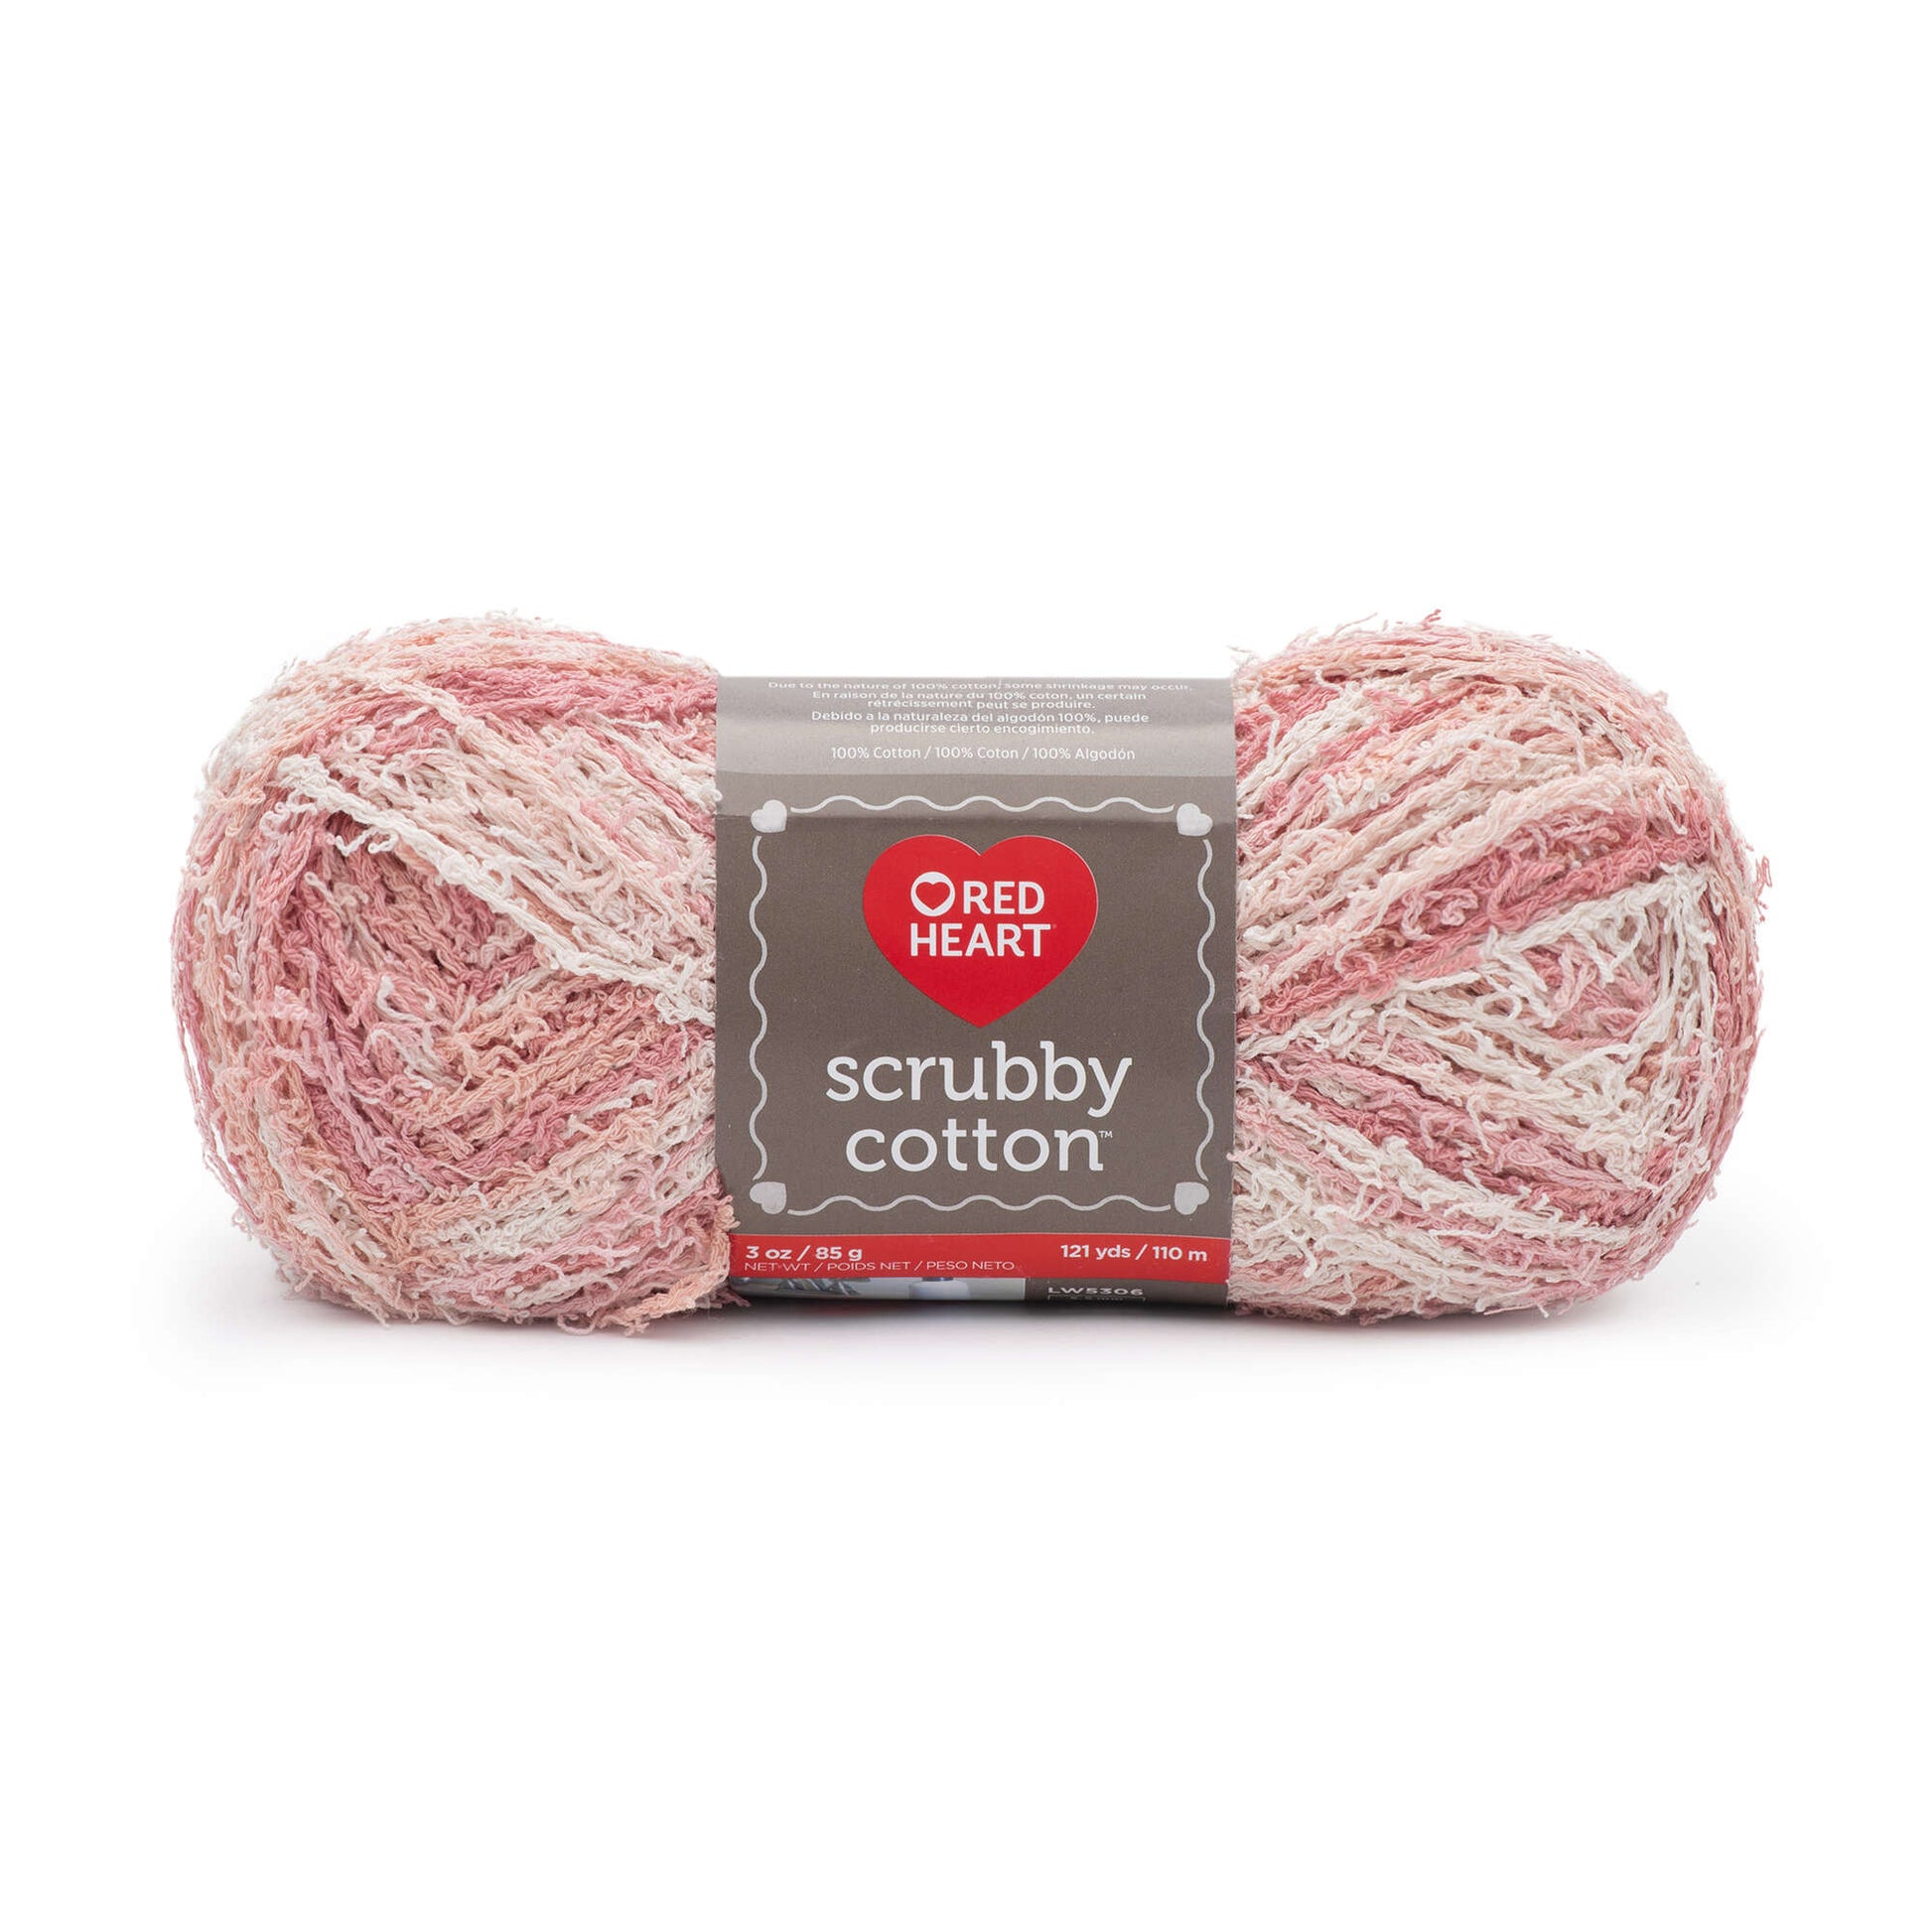 Red Heart Scrubby Cotton Yarn - Clearance shades Blissful Print